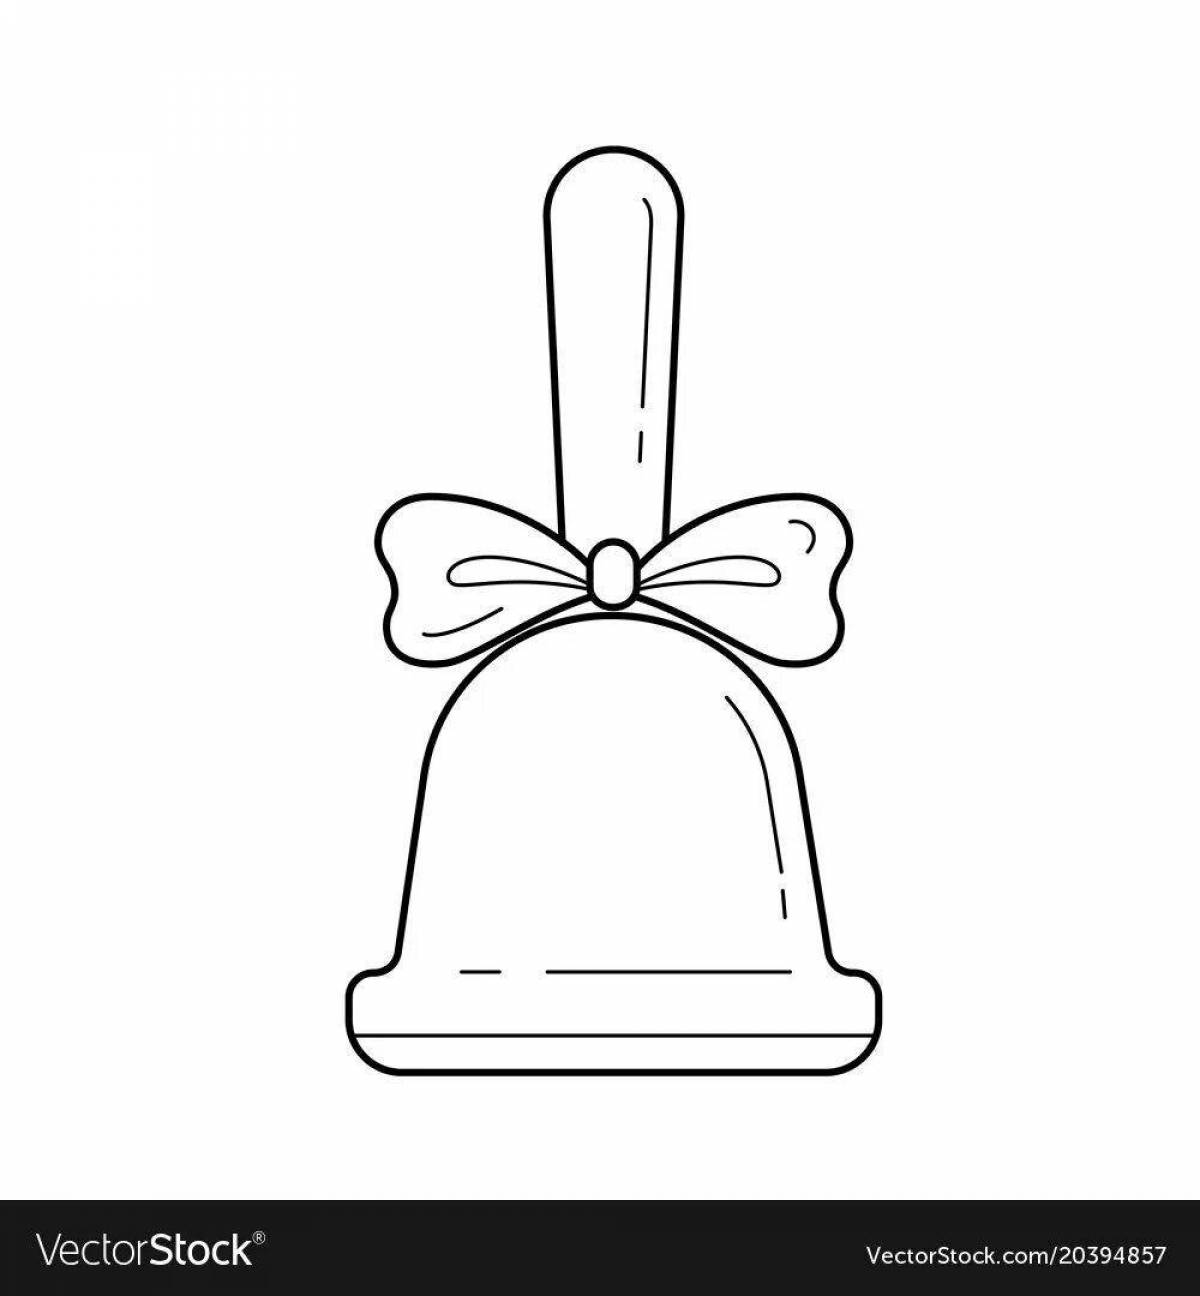 Festive school bell with a bow